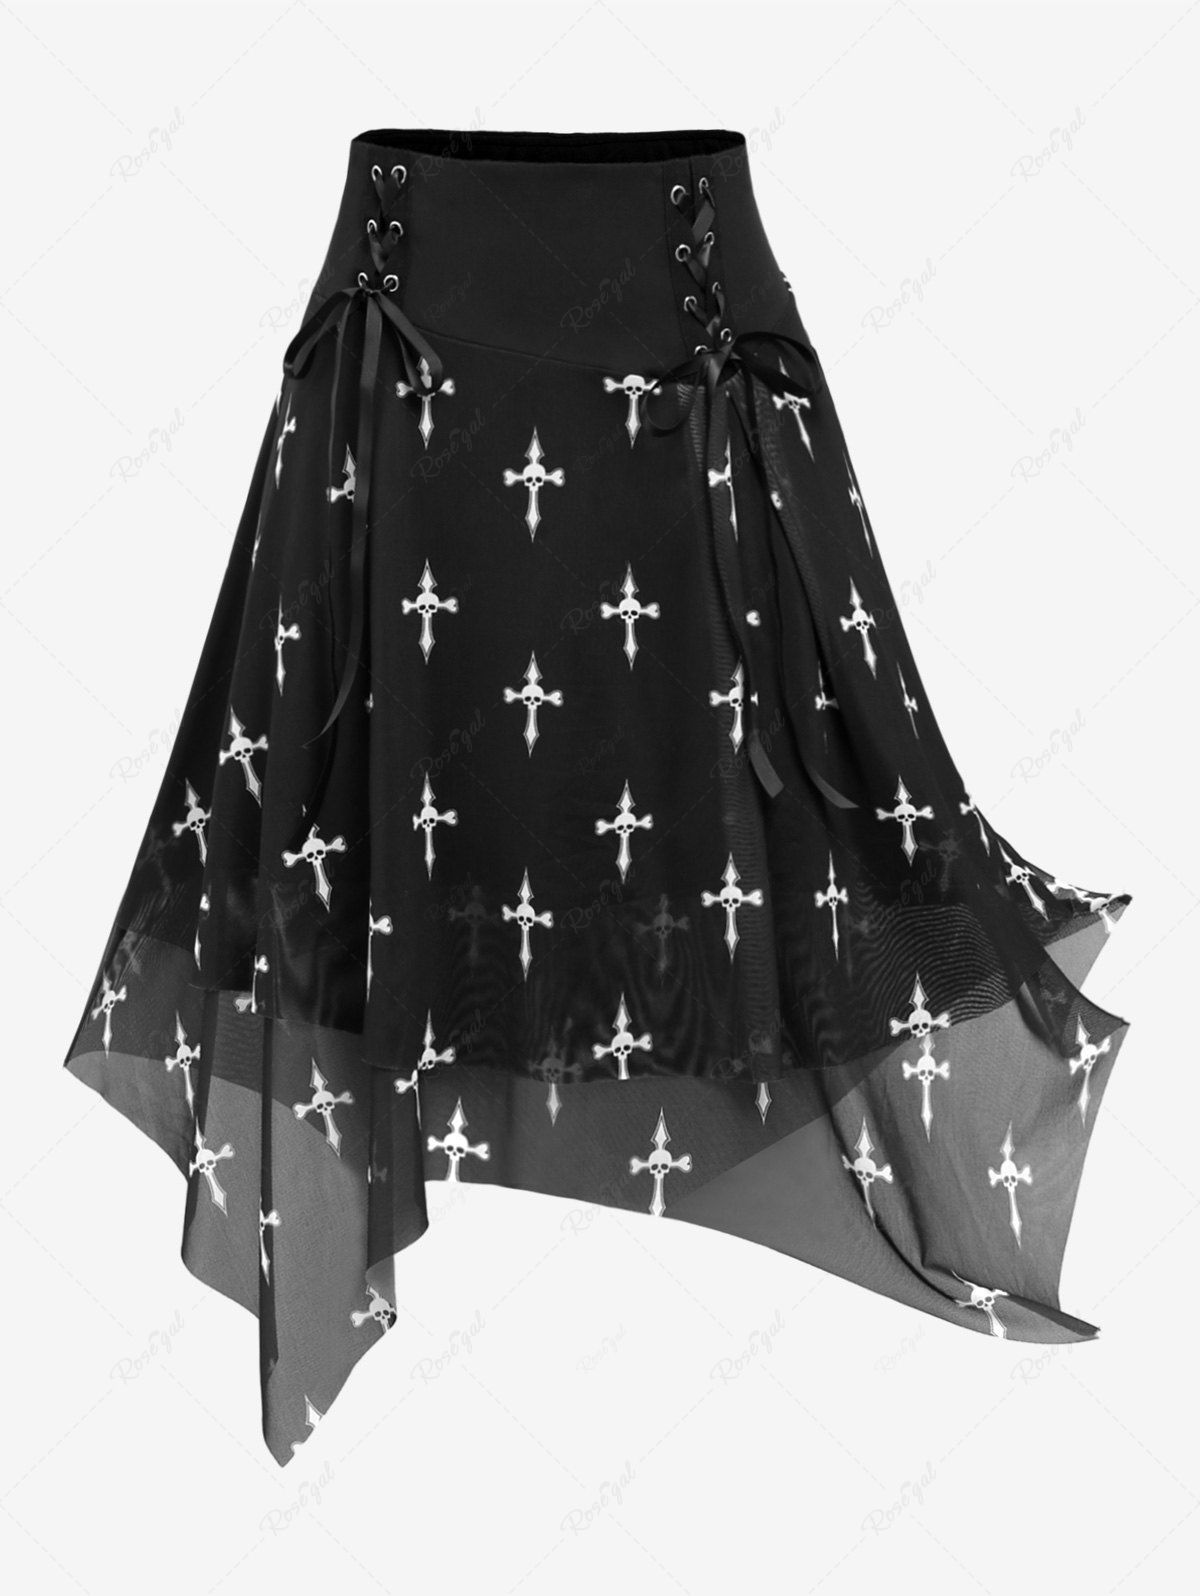 Plus Size Halloween Skull Cross Printed Mesh Lace Up Layered Skirt Noir L | US 12